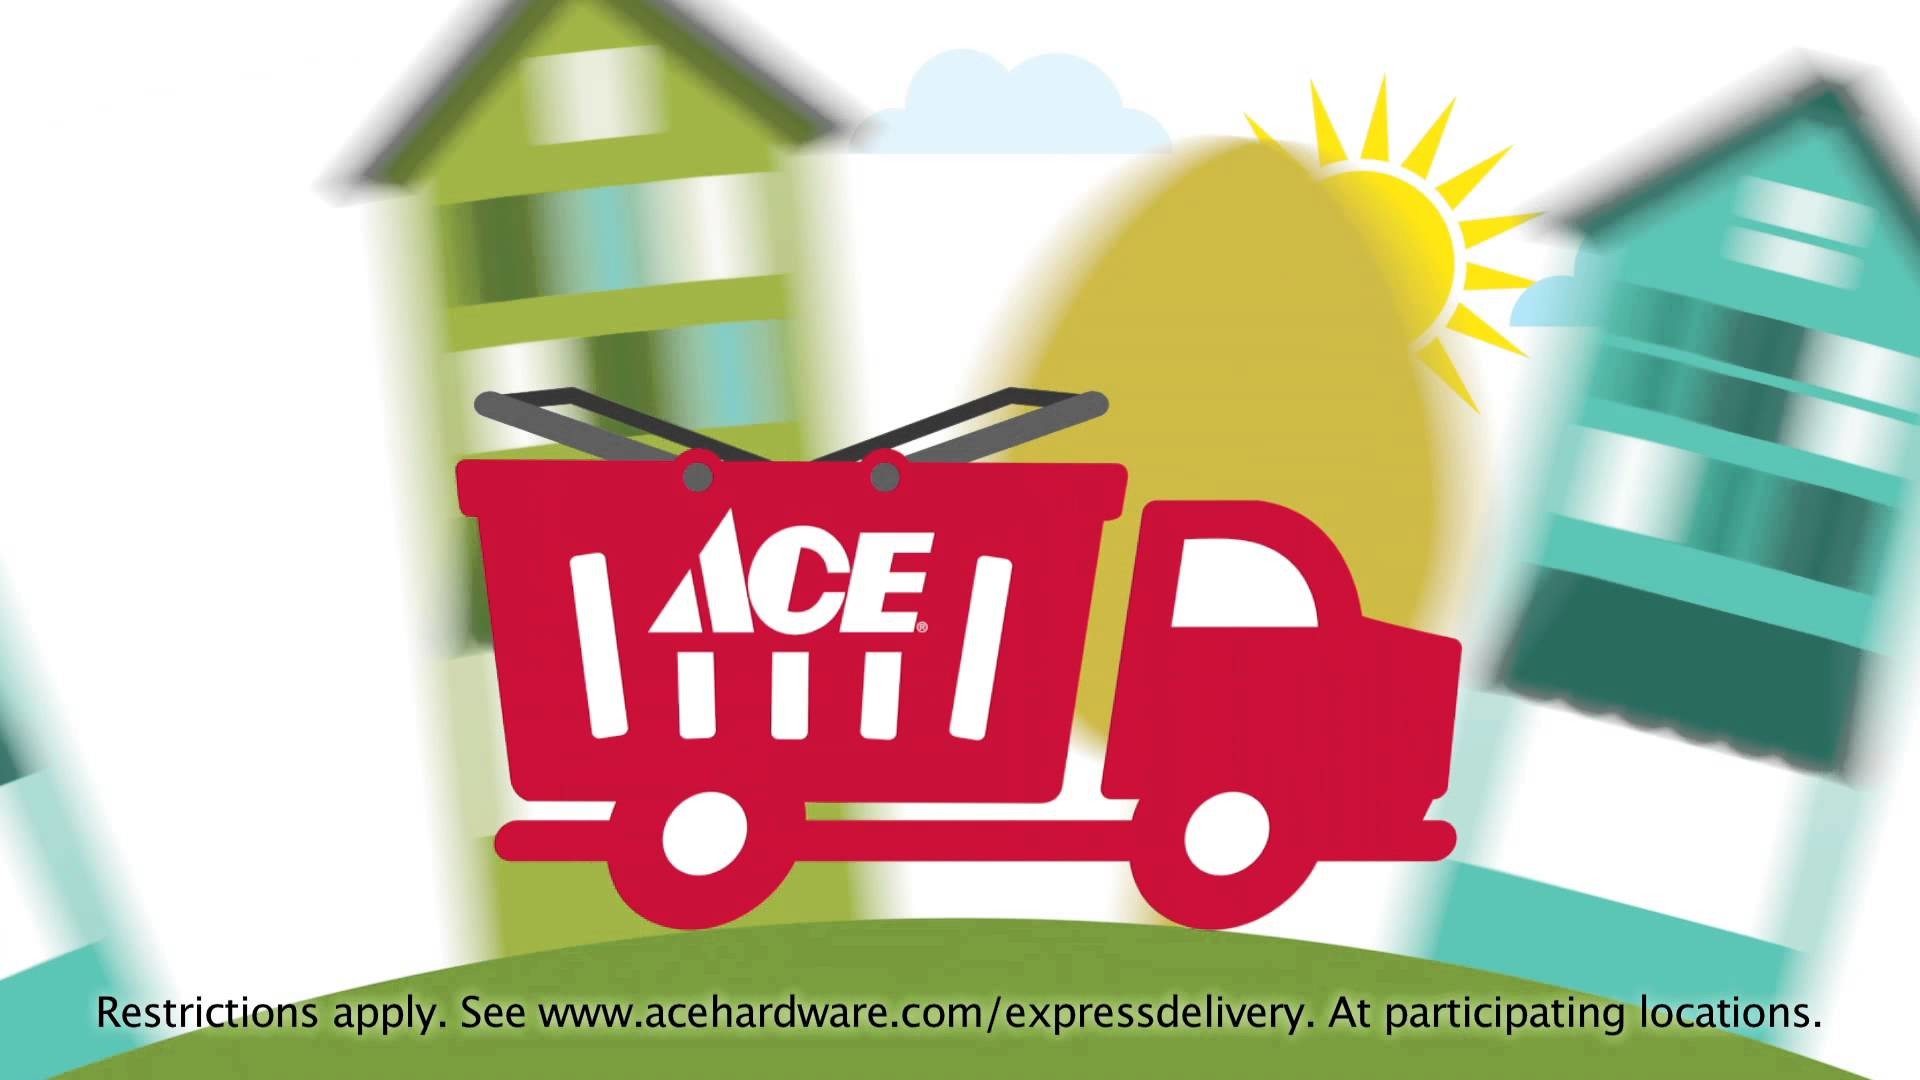 1920x1080 Express Delivery- Same Day Delivery from your Neighborhood Ace - YouTube